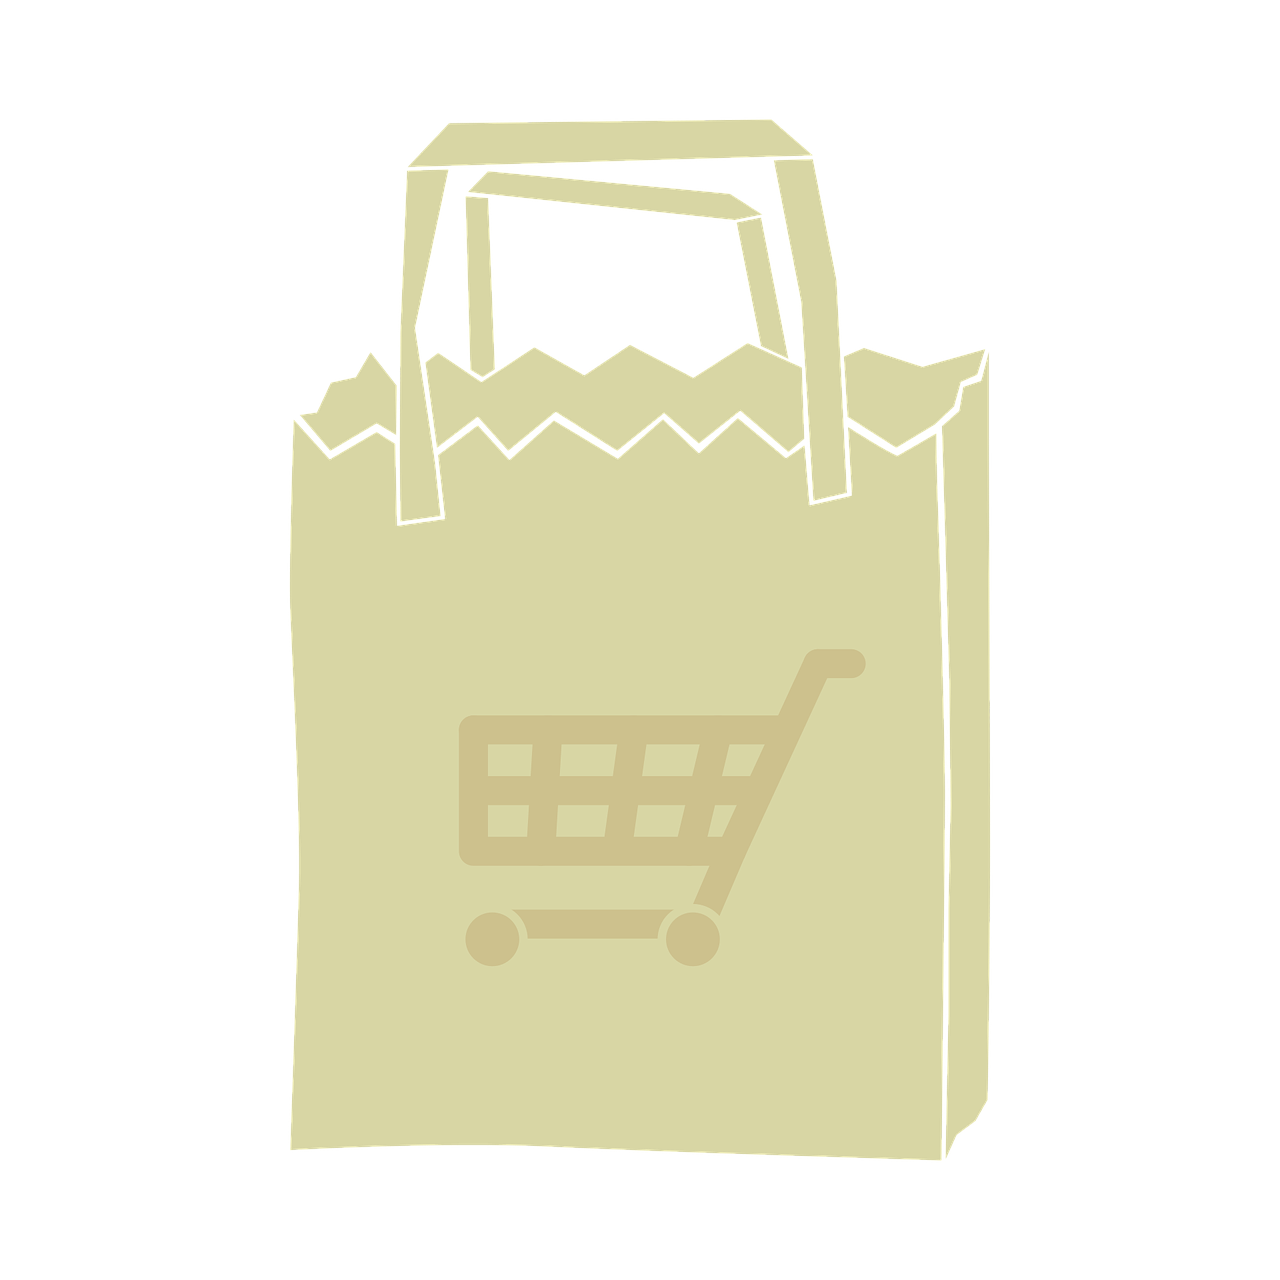 A vector sample image of a printed paper bag.